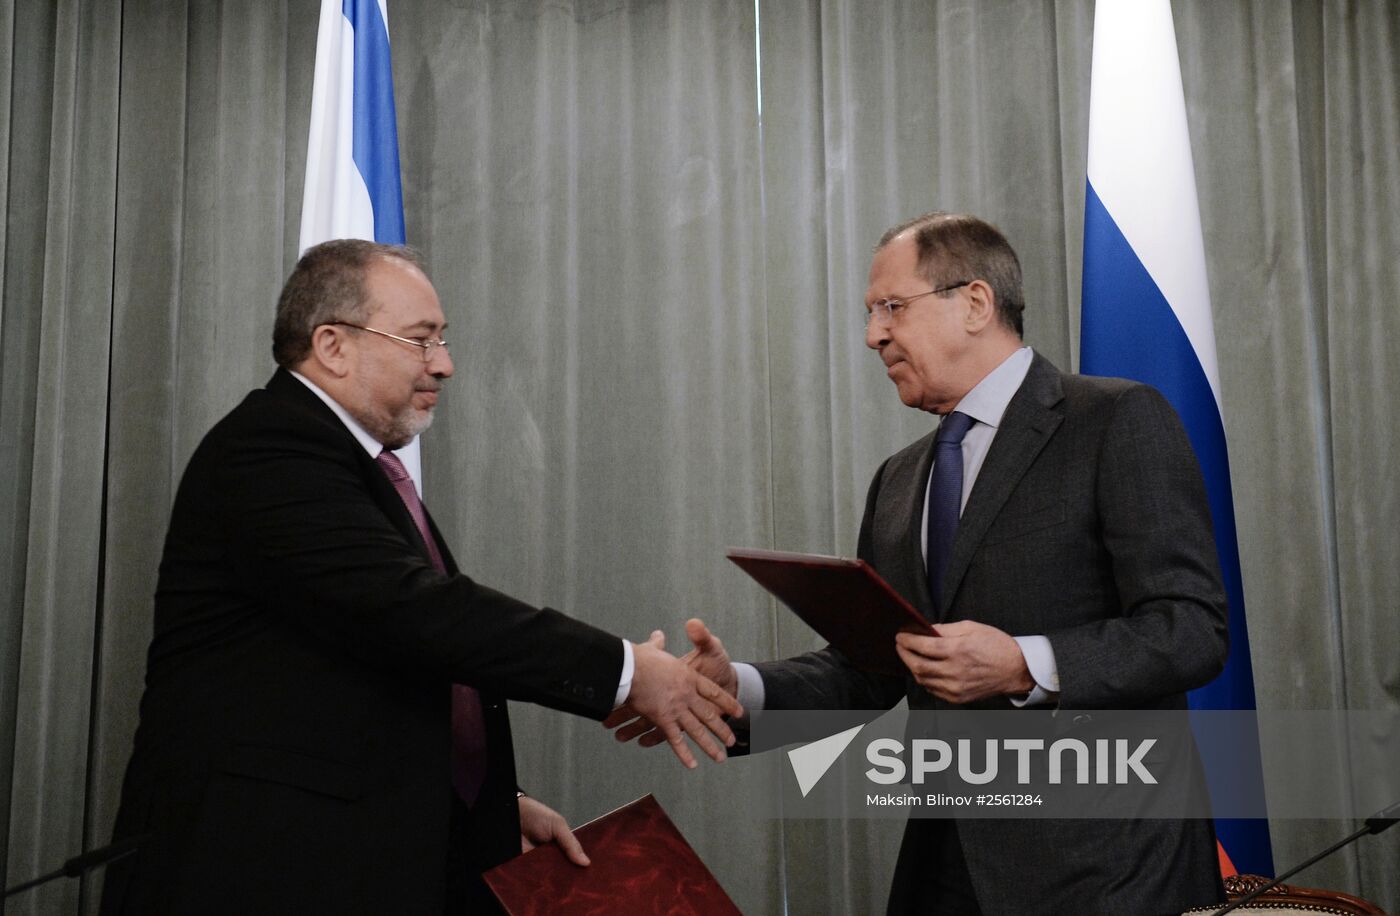 Russian Foreign Minister Sergei Lavrov meets with Avigdor Lieberman